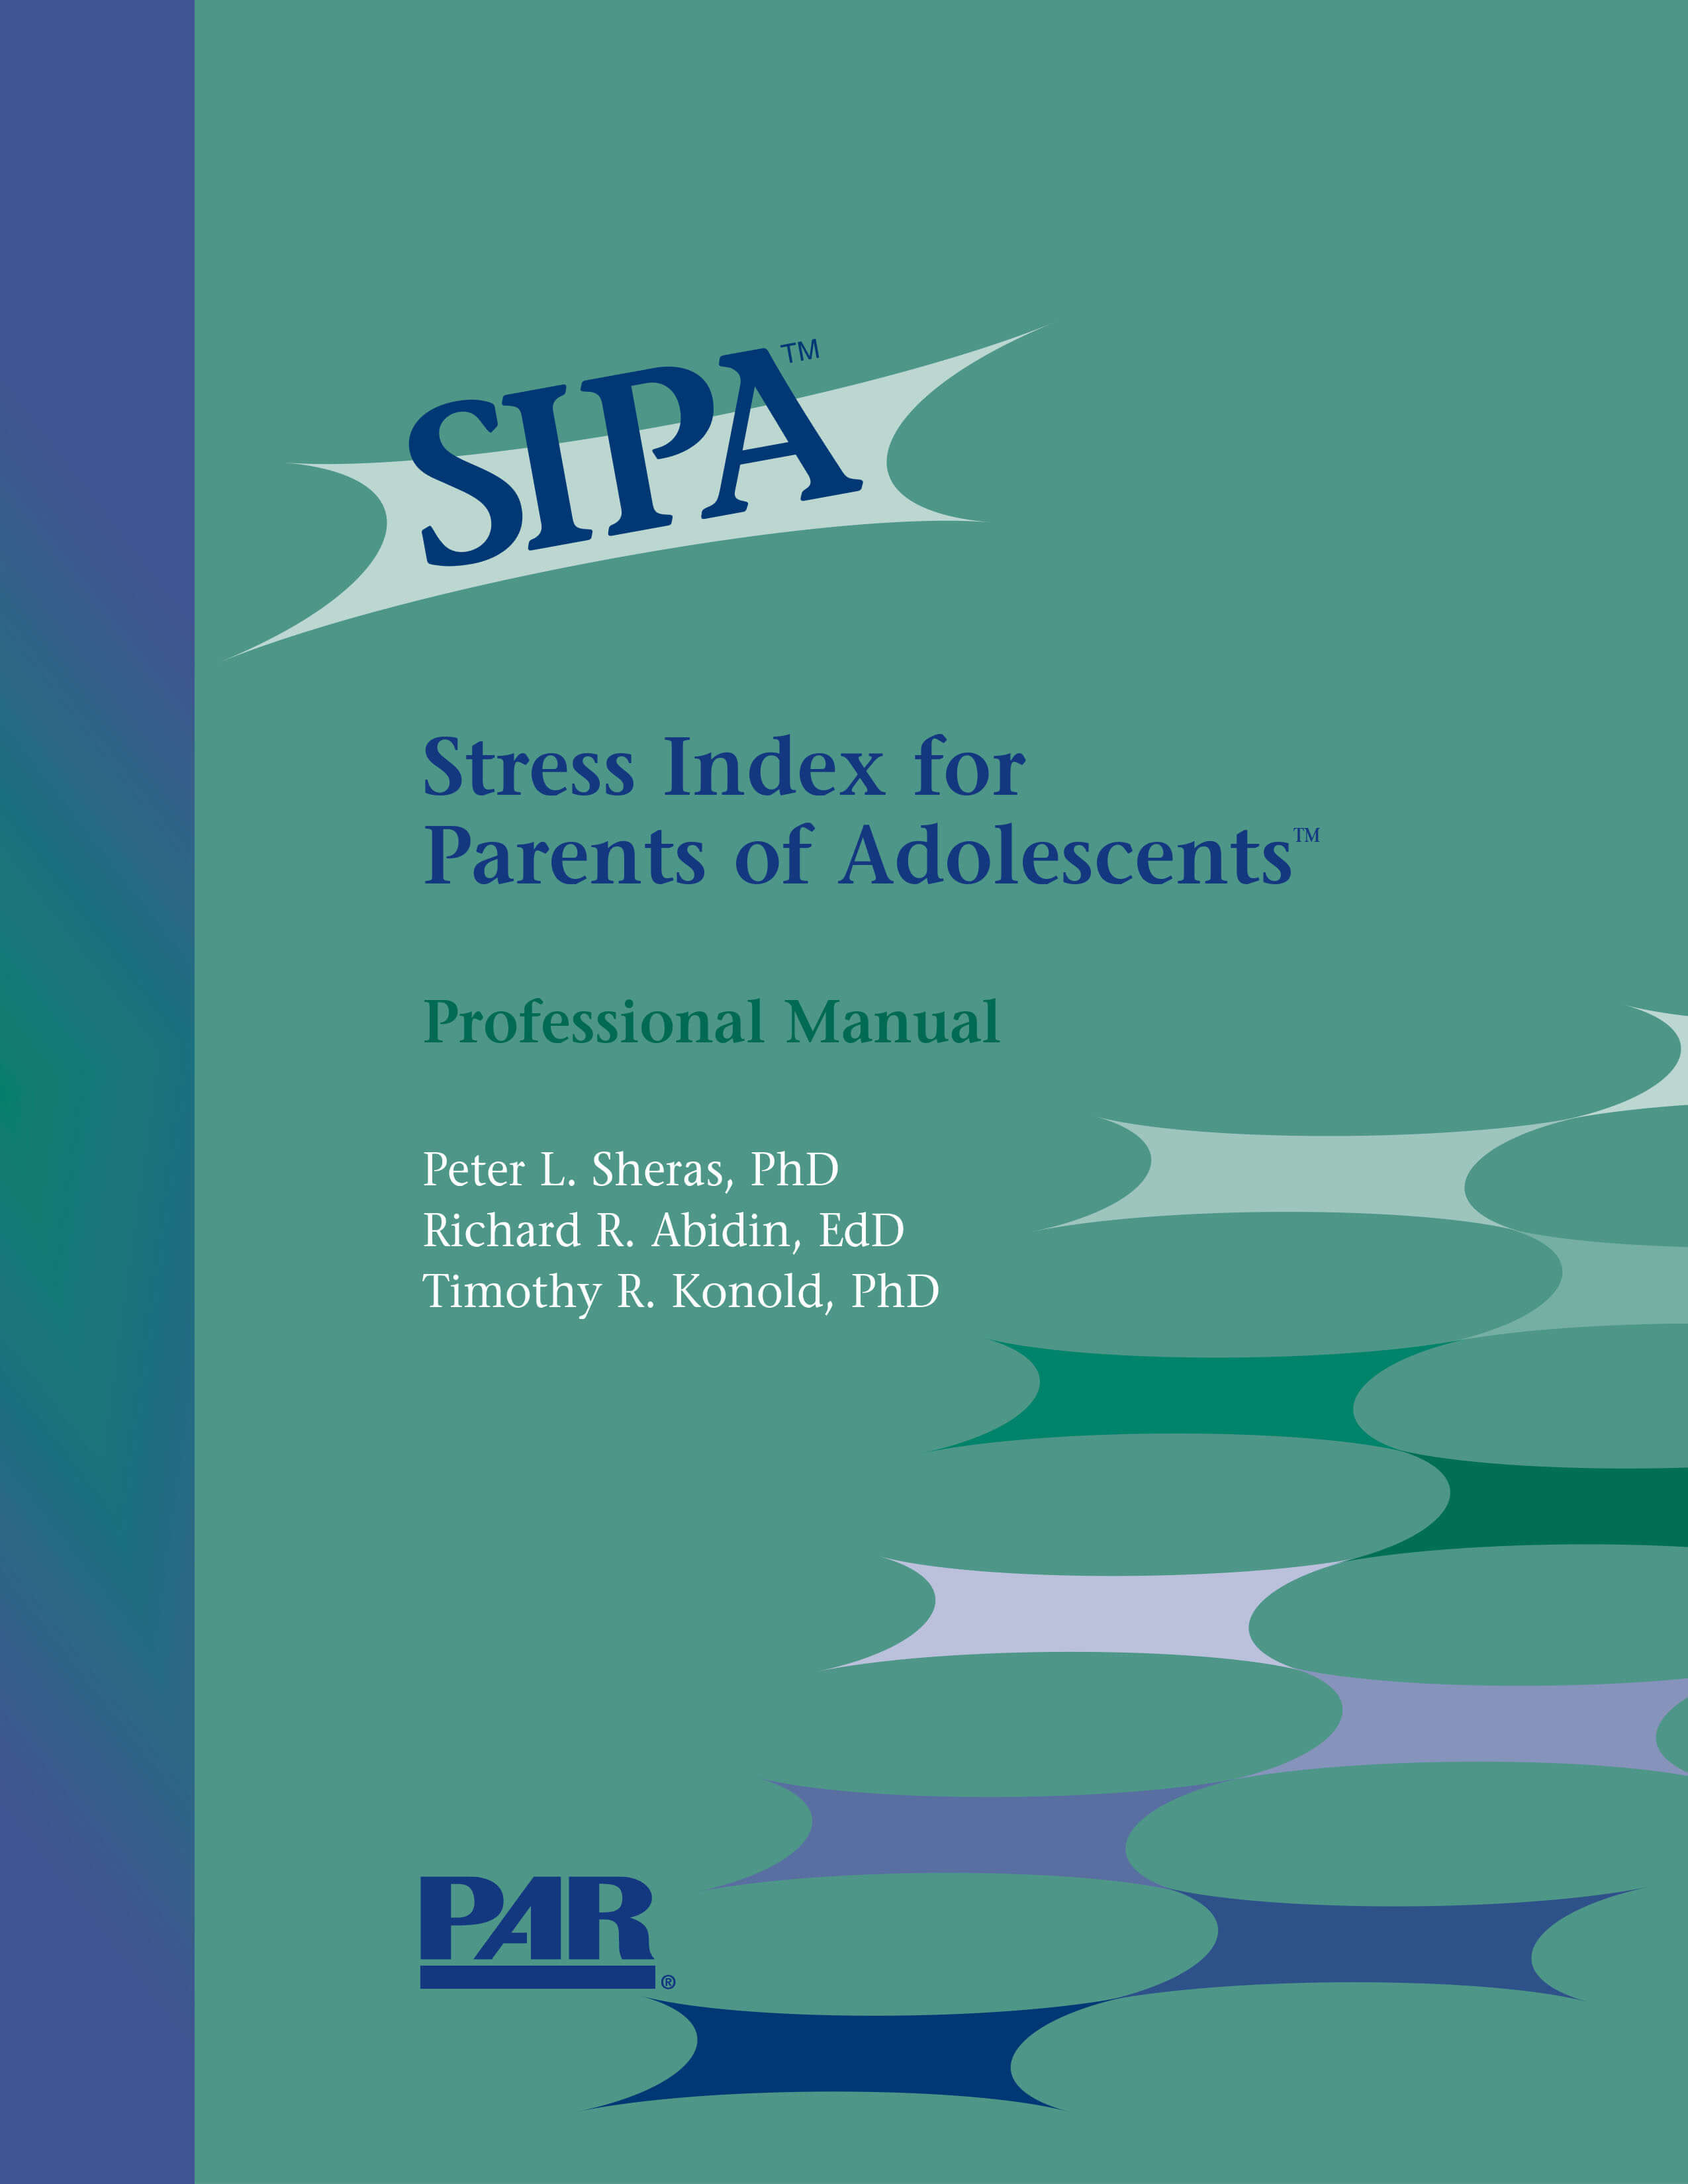 SIPA Assessment Stress Index for Parents of Adolescents Brainworx